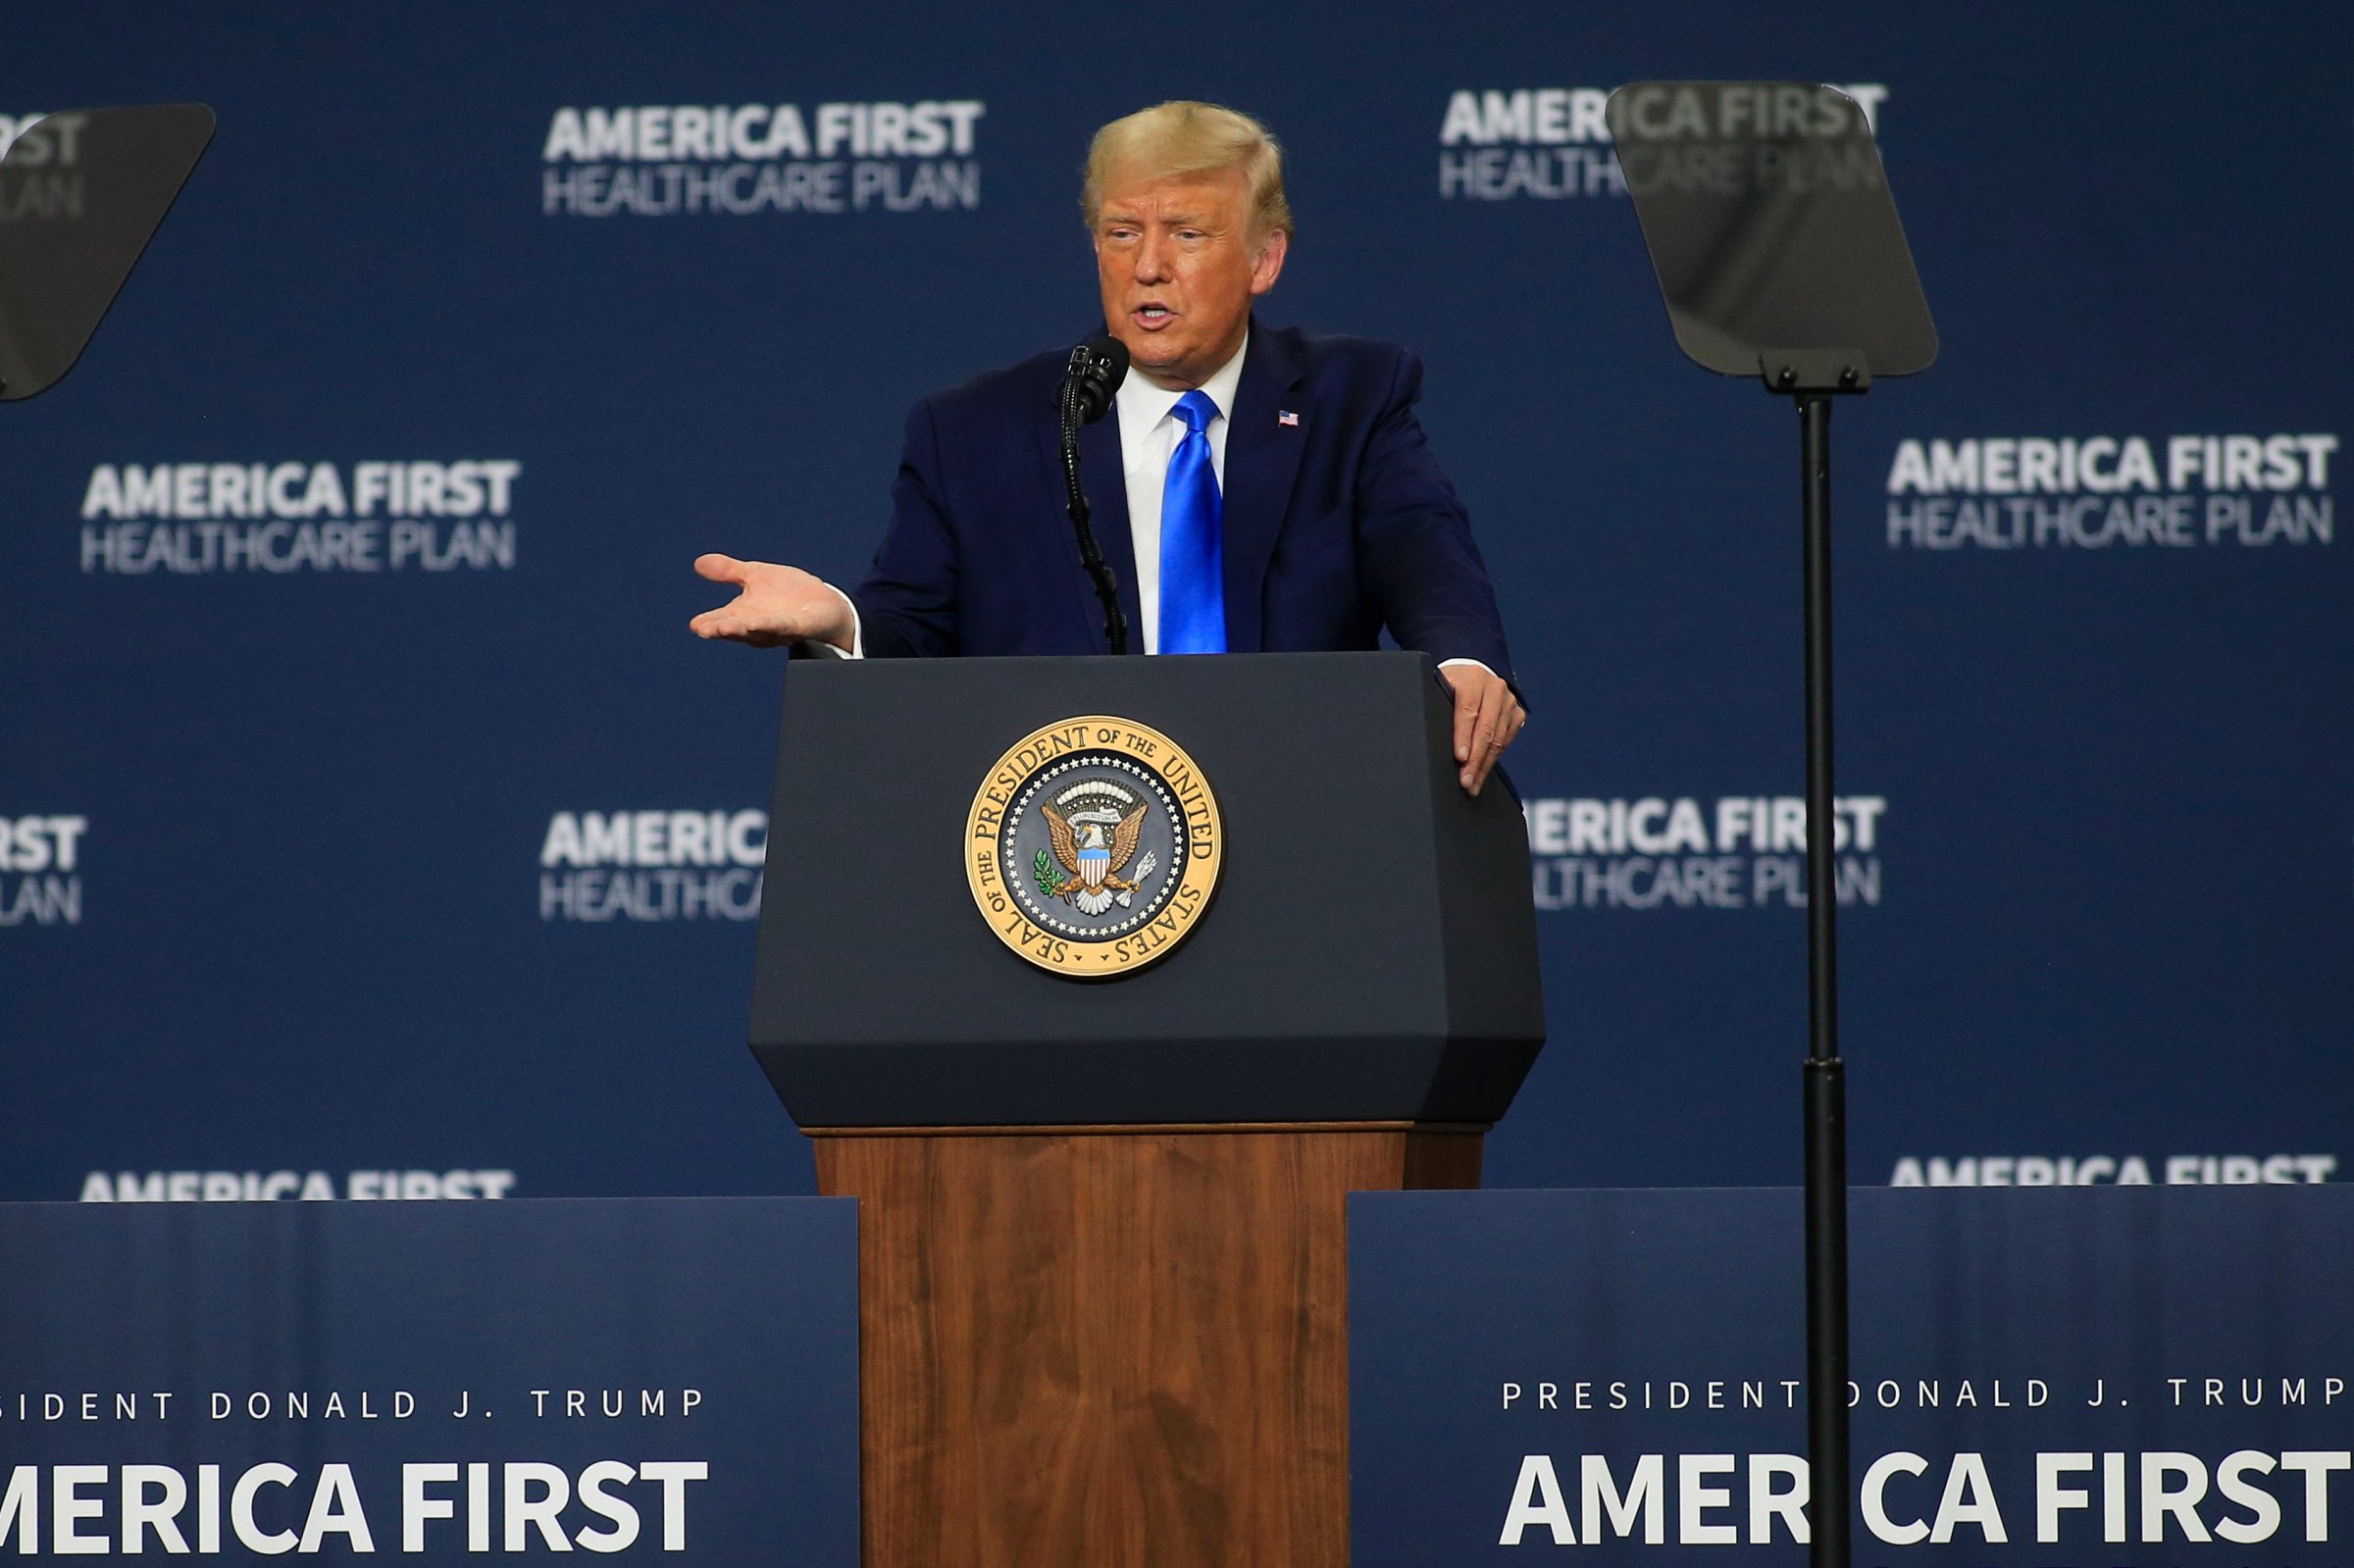 President Donald Trump delivers a speech about health care on Sept. 24, 2020 in Charlotte, North Carolina, less than six weeks before the November election.